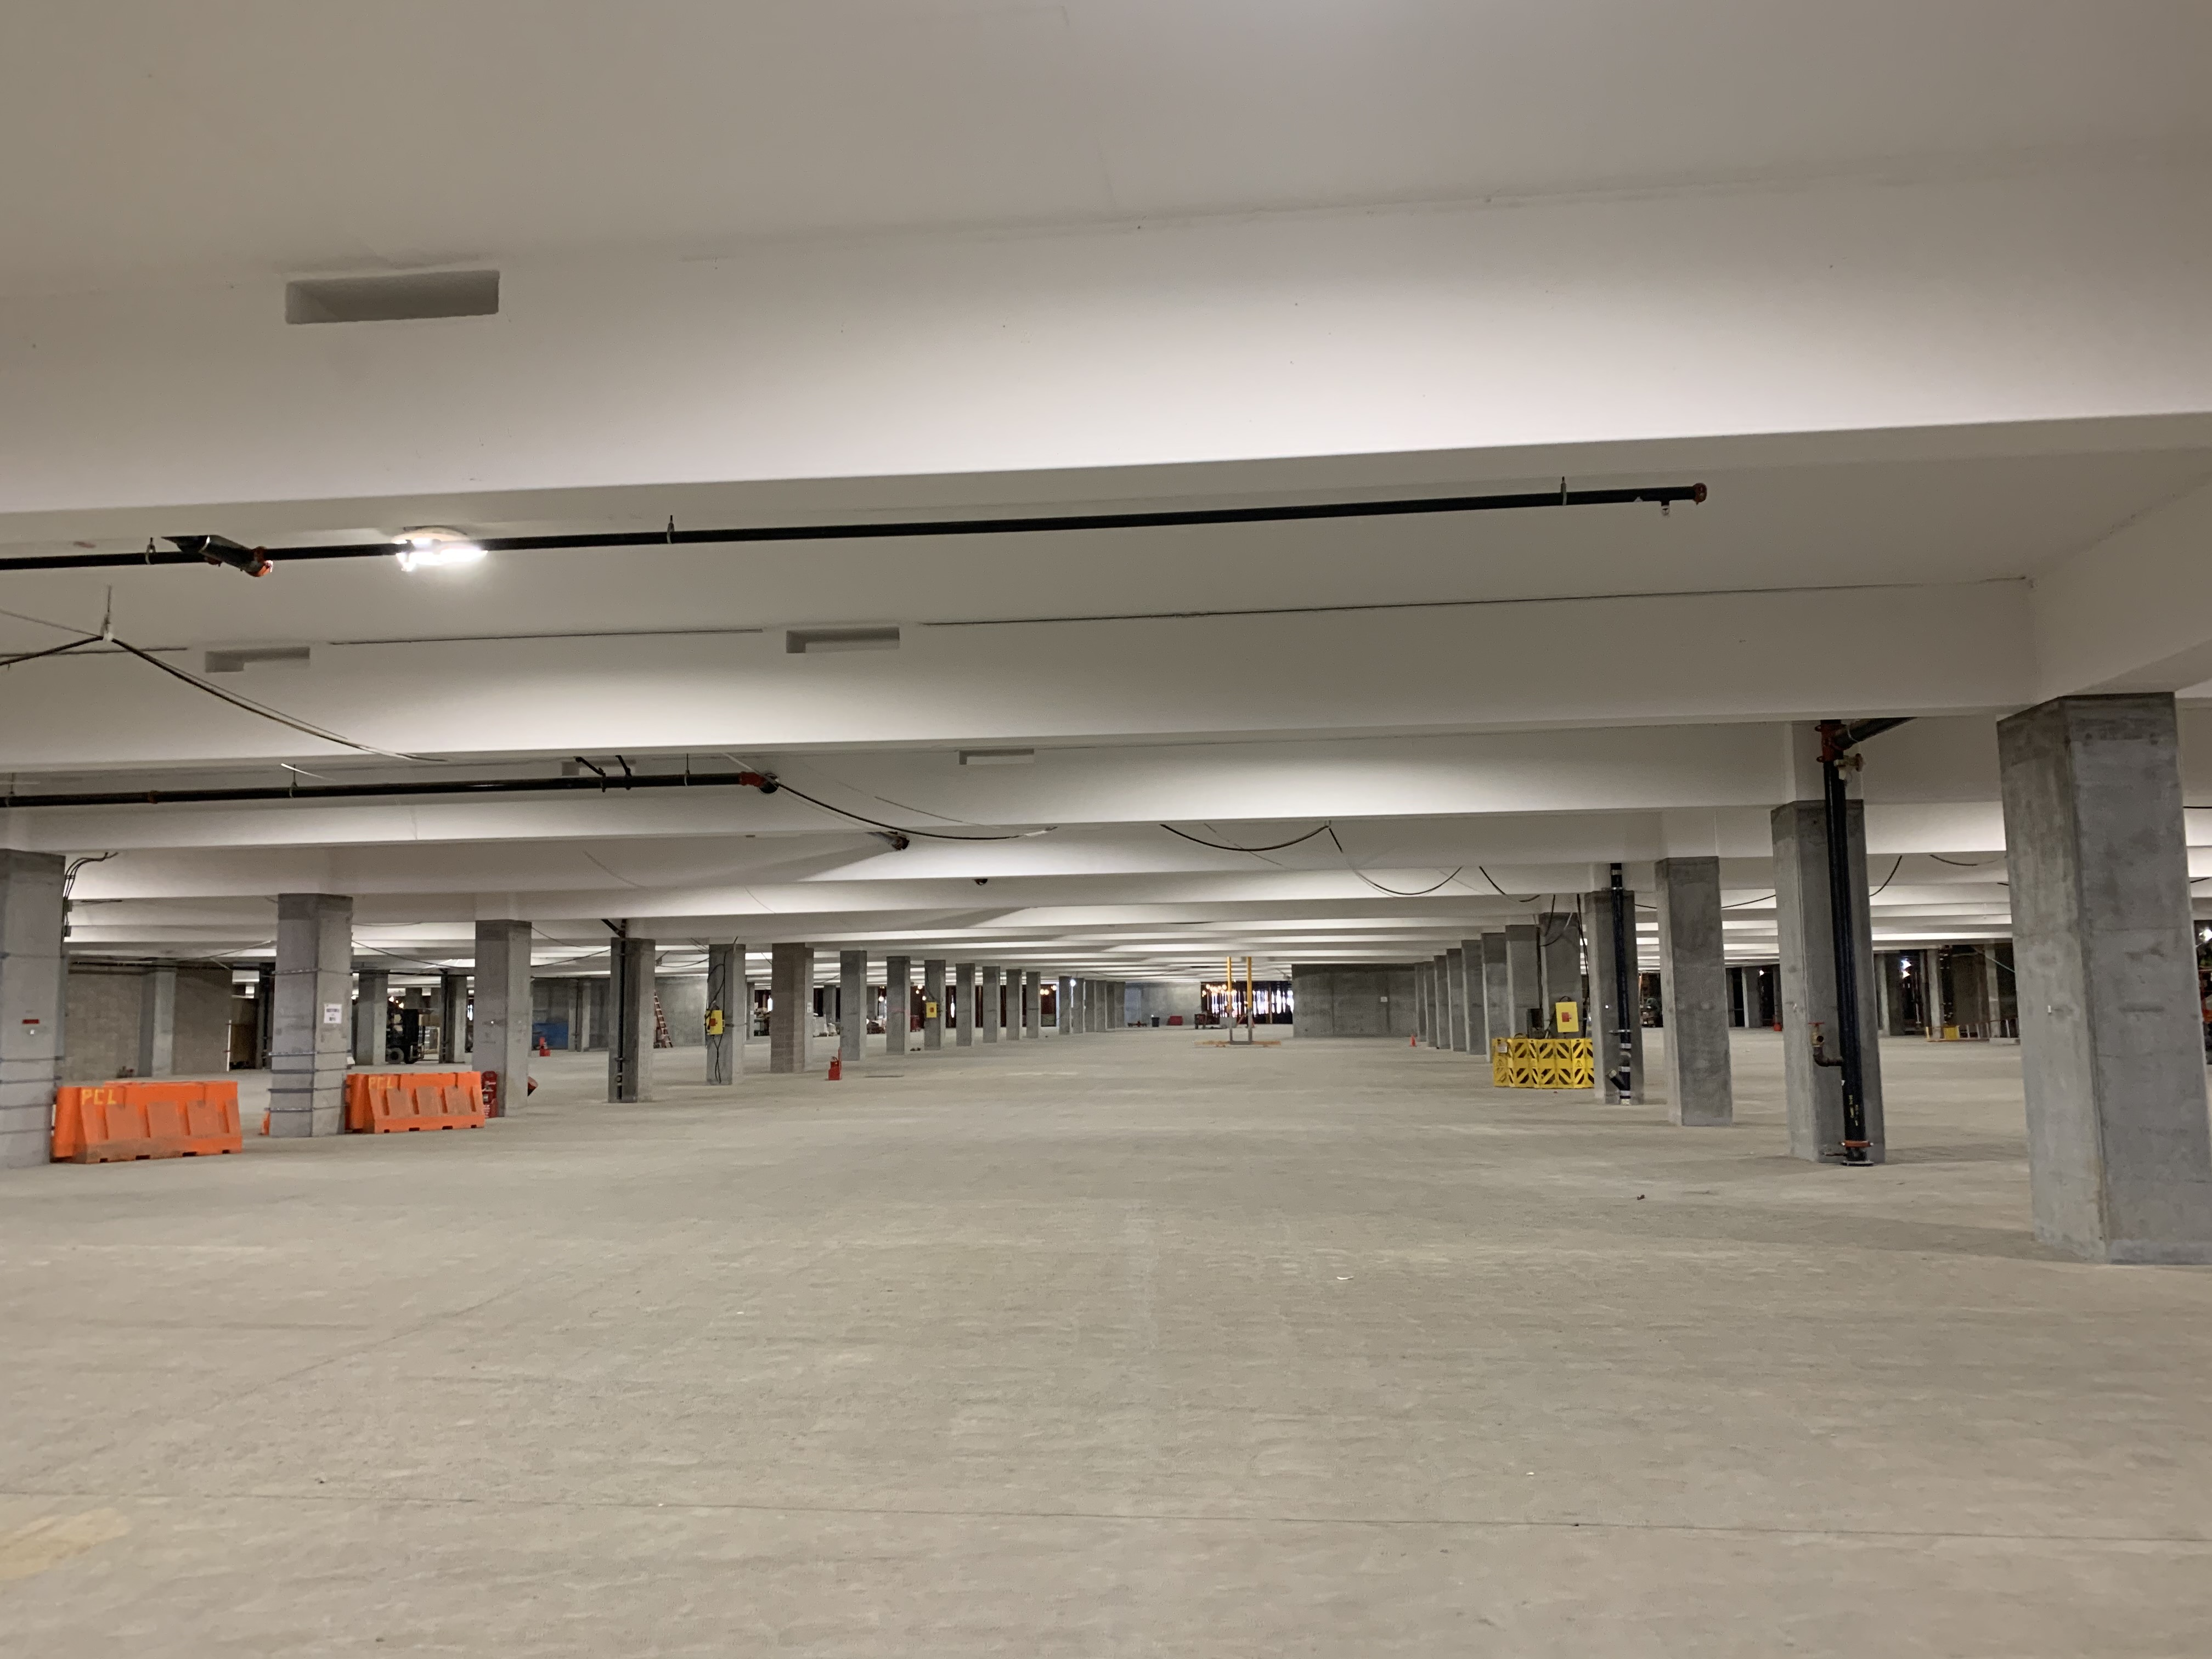 Ceiling paint and permanent lighting at lower level of the Consolidated Rent-A-Car facility.